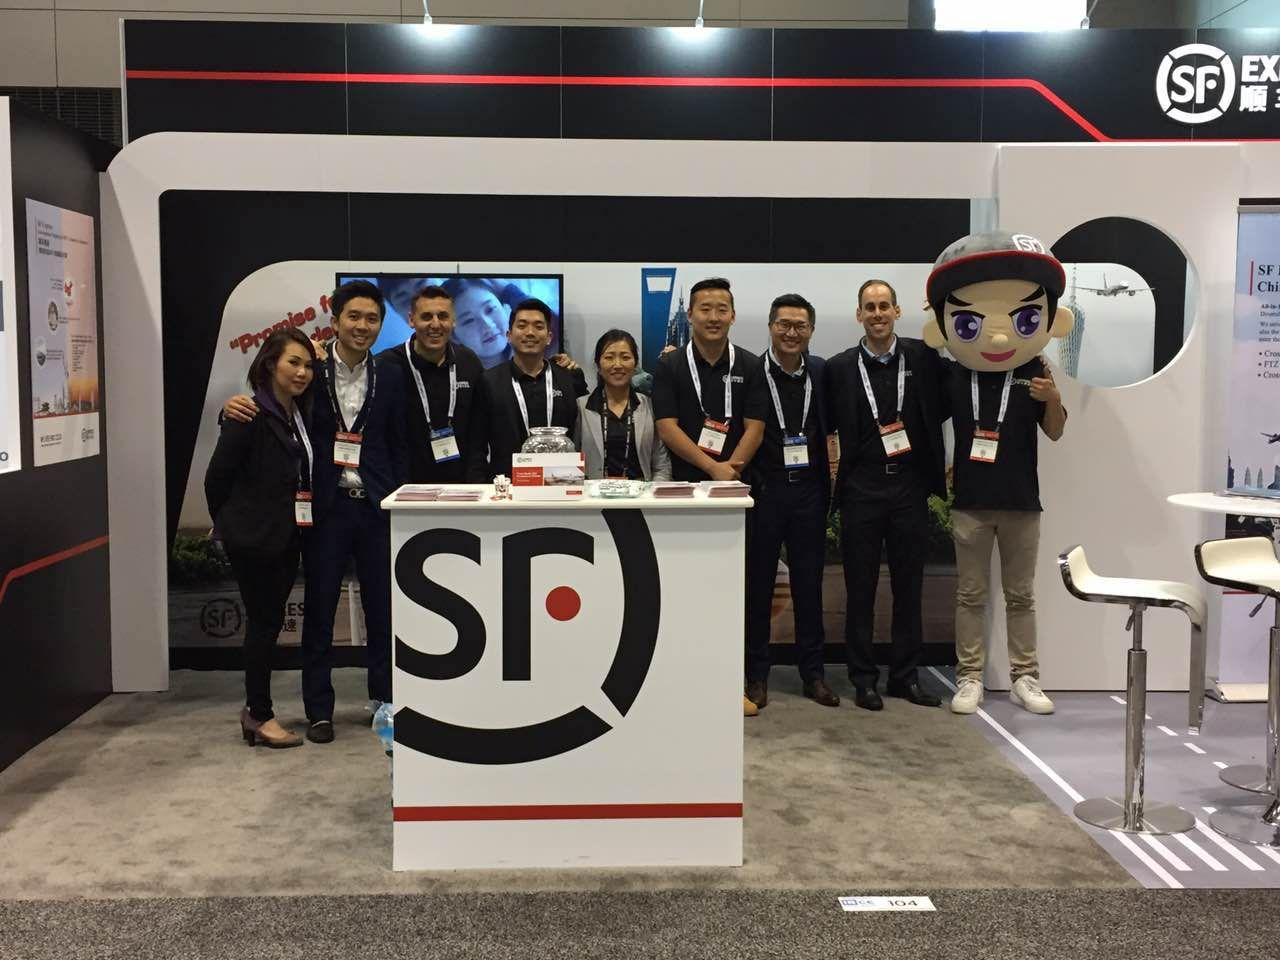 SF Express Logo - Your Key to China - SF Express Debuts China B2C Complete Solution at ...